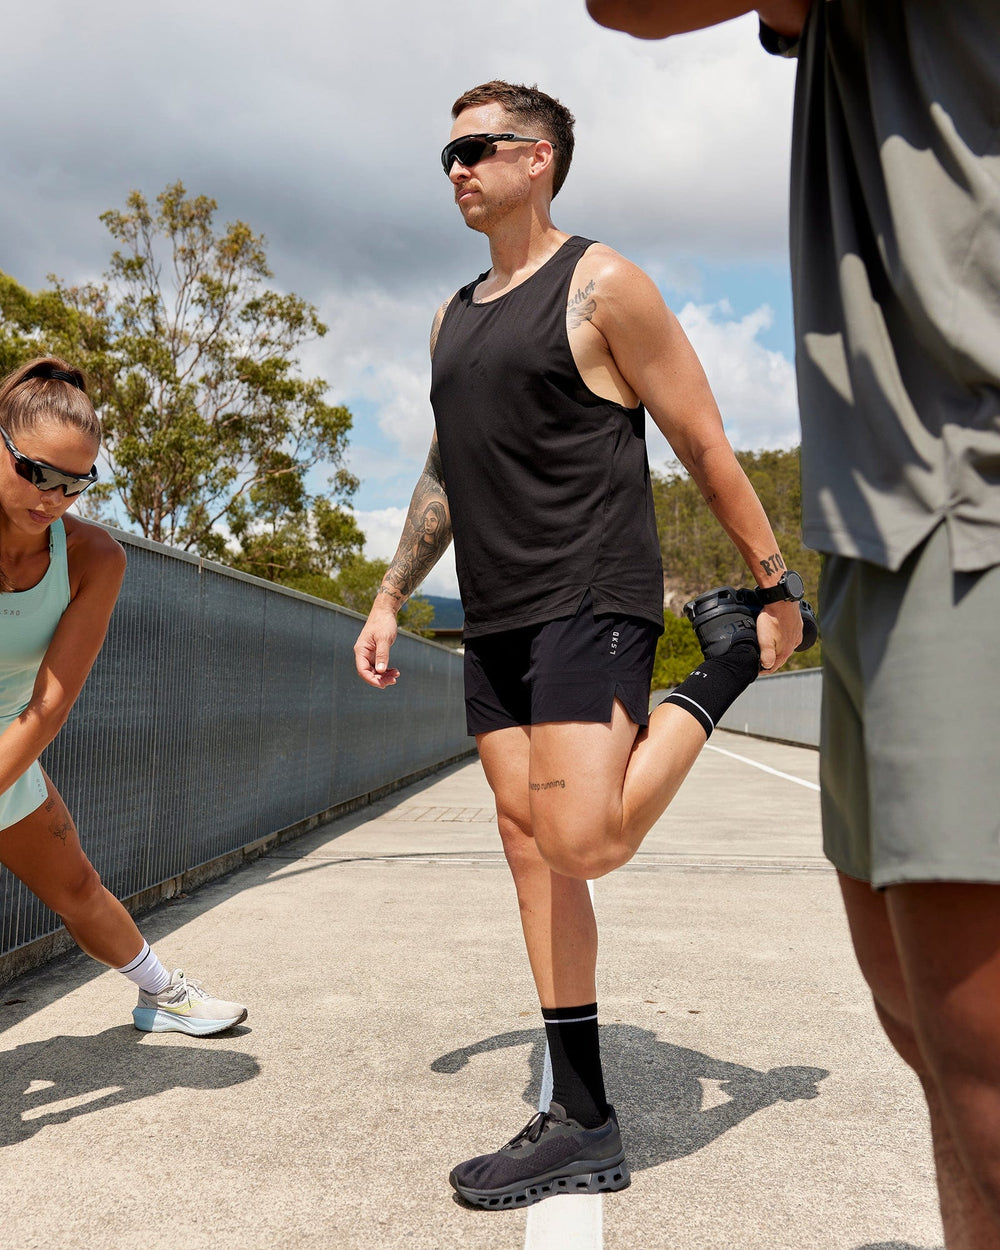 Running is a sport of obsession. The Pace collection was designed